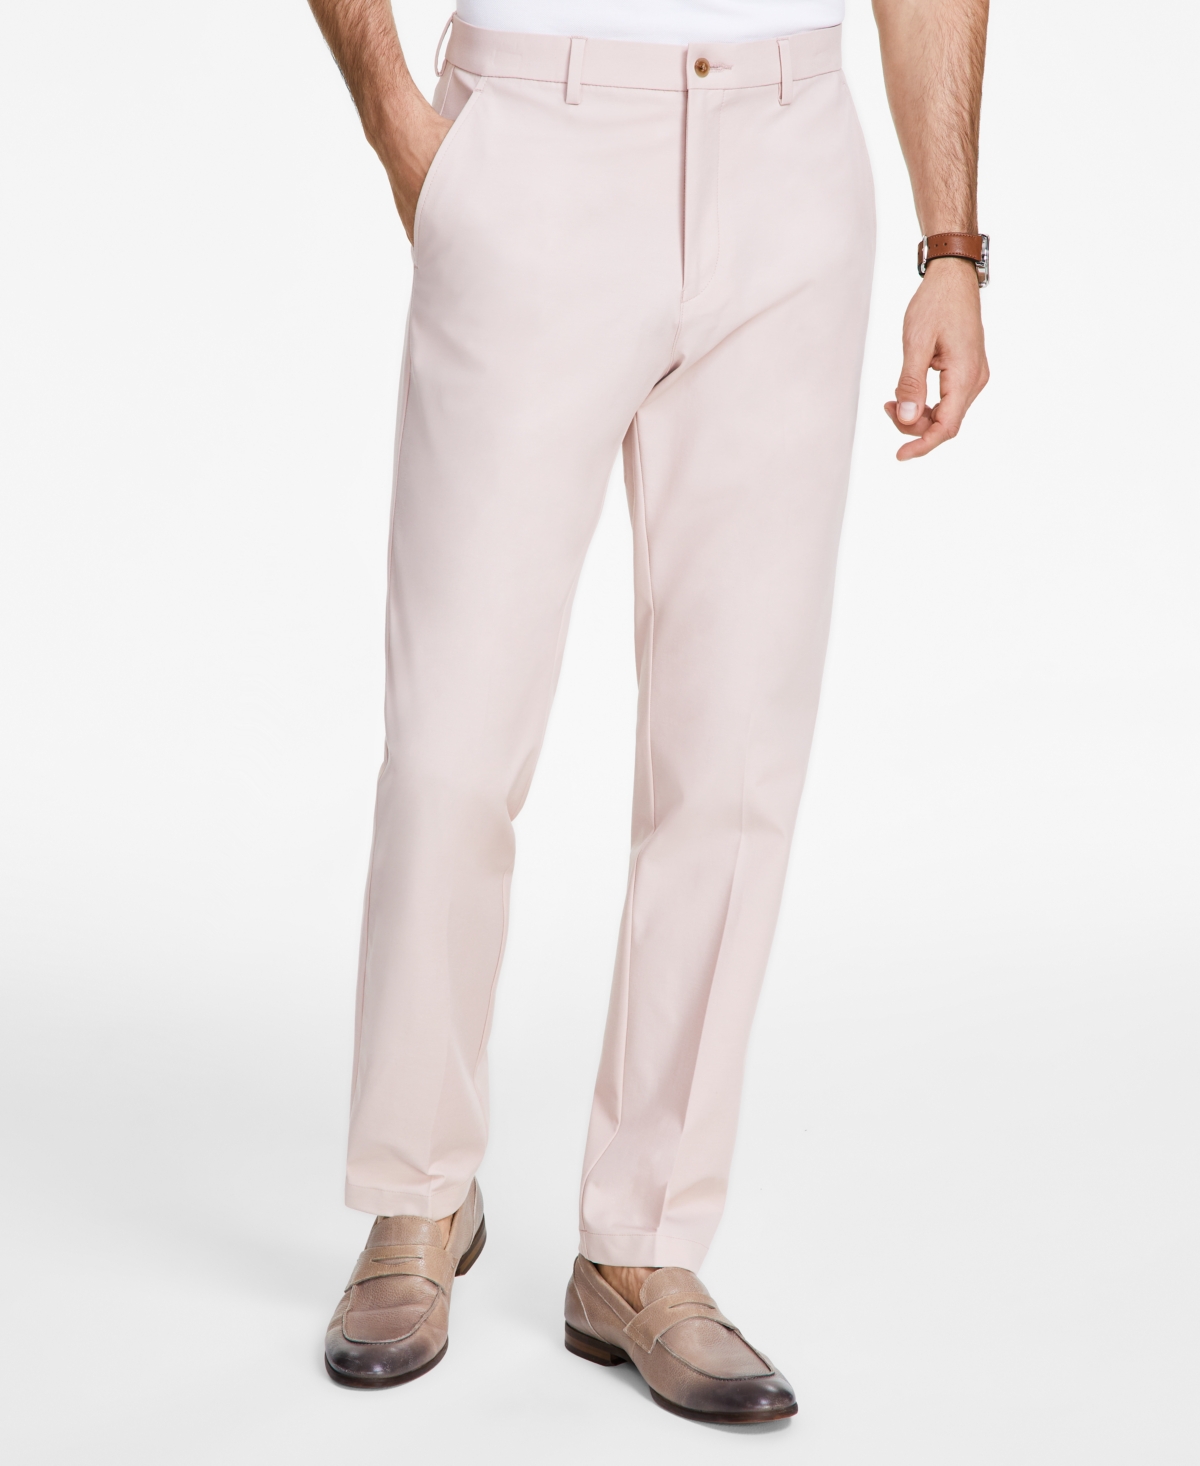 Michael Kors Men's Classic Fit Cotton Stretch Performance Pants In Pink